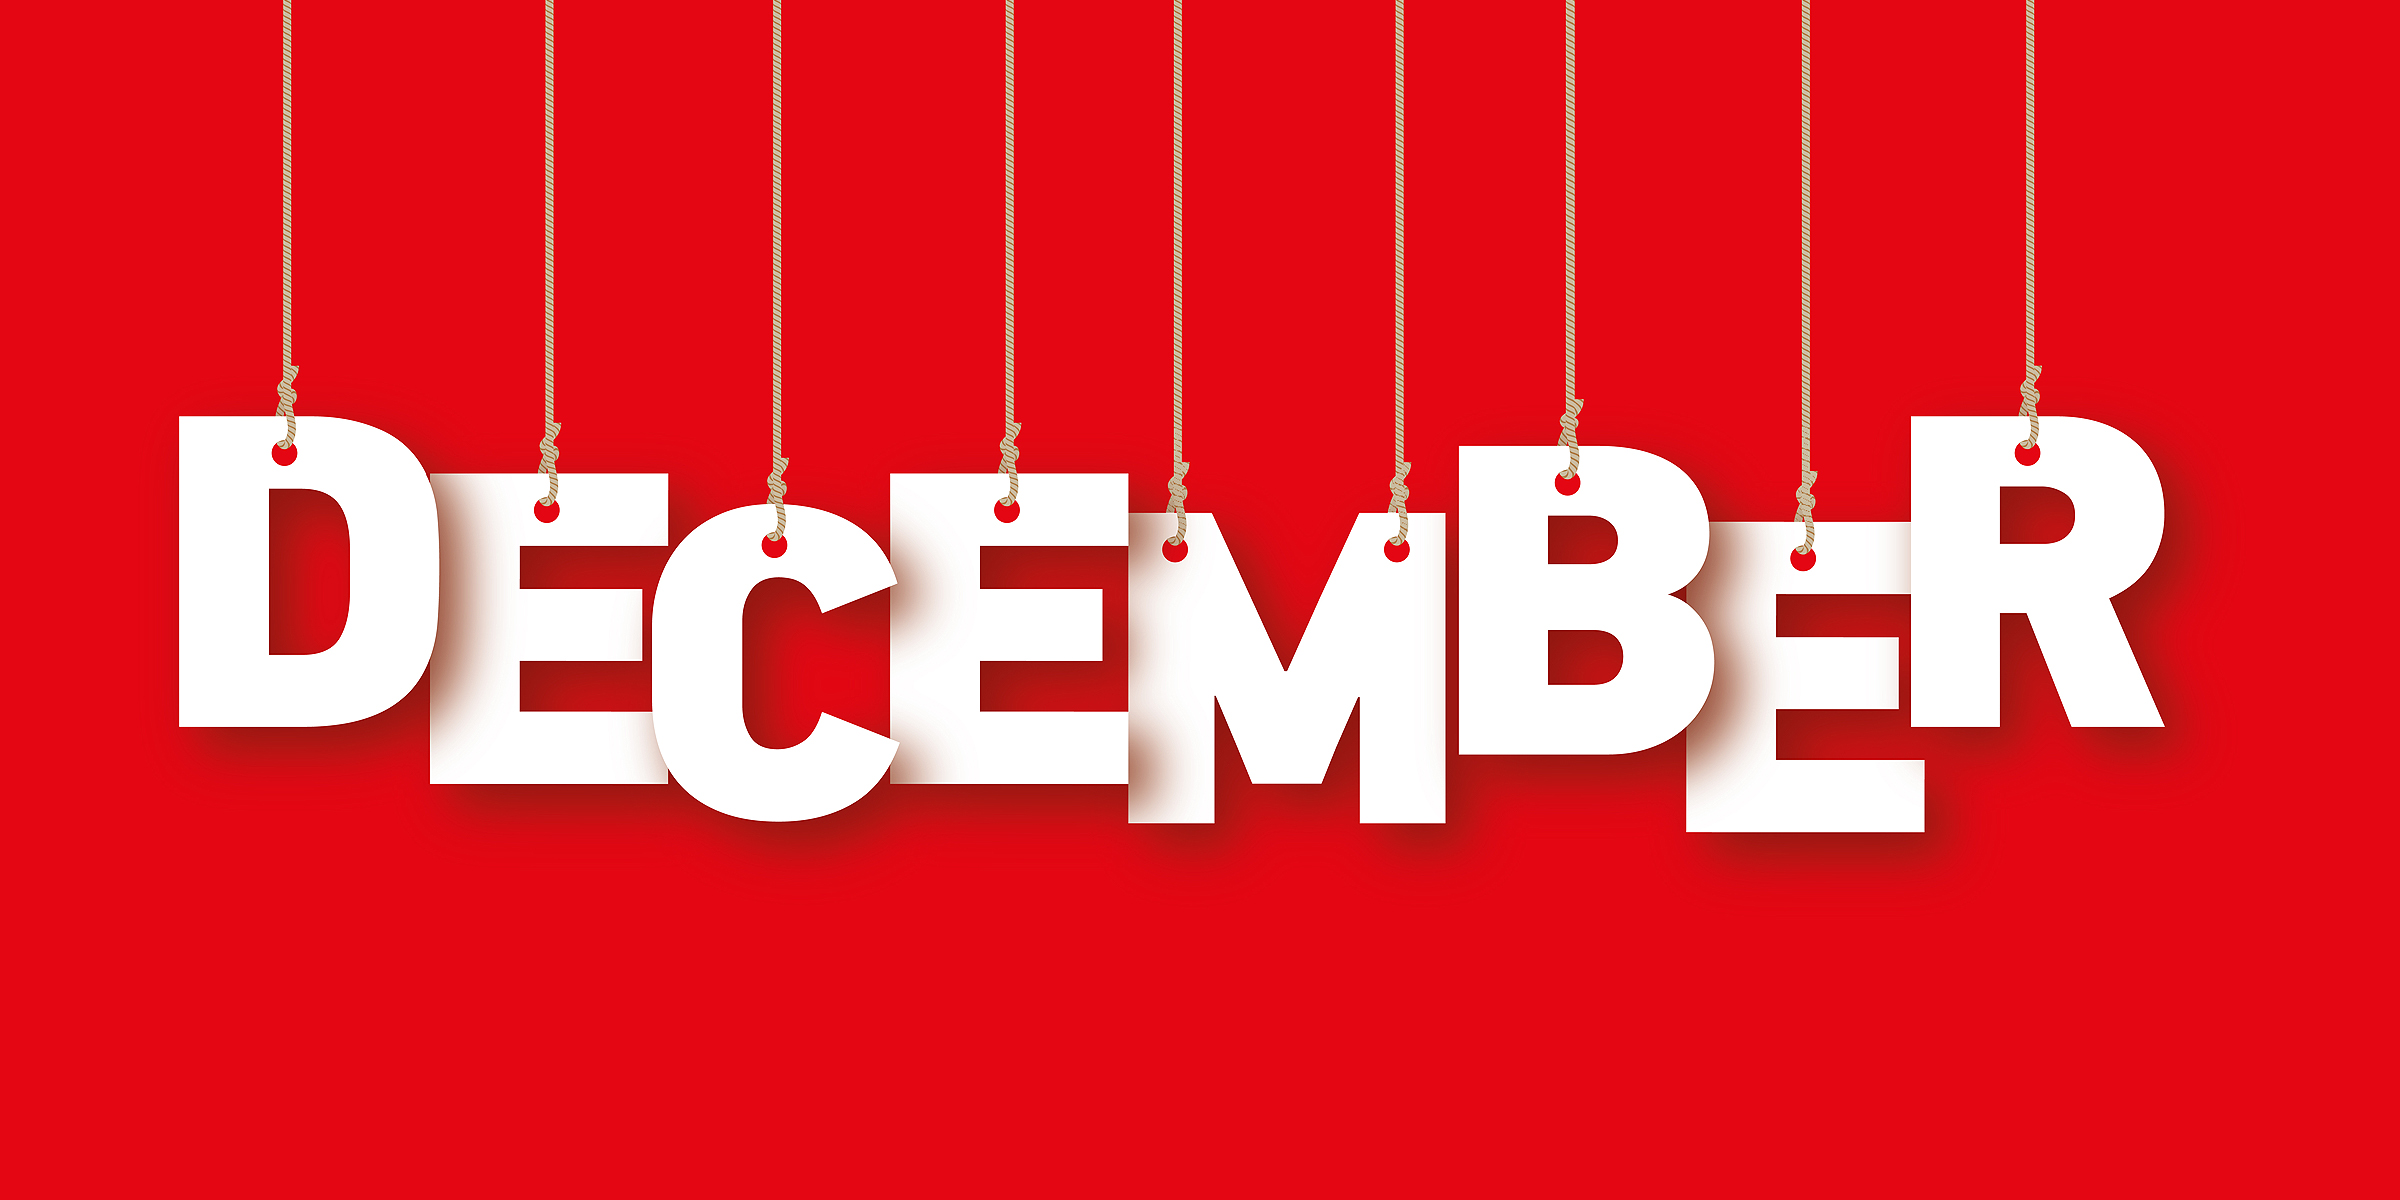 The word December on a red background | Source: Shutterstock